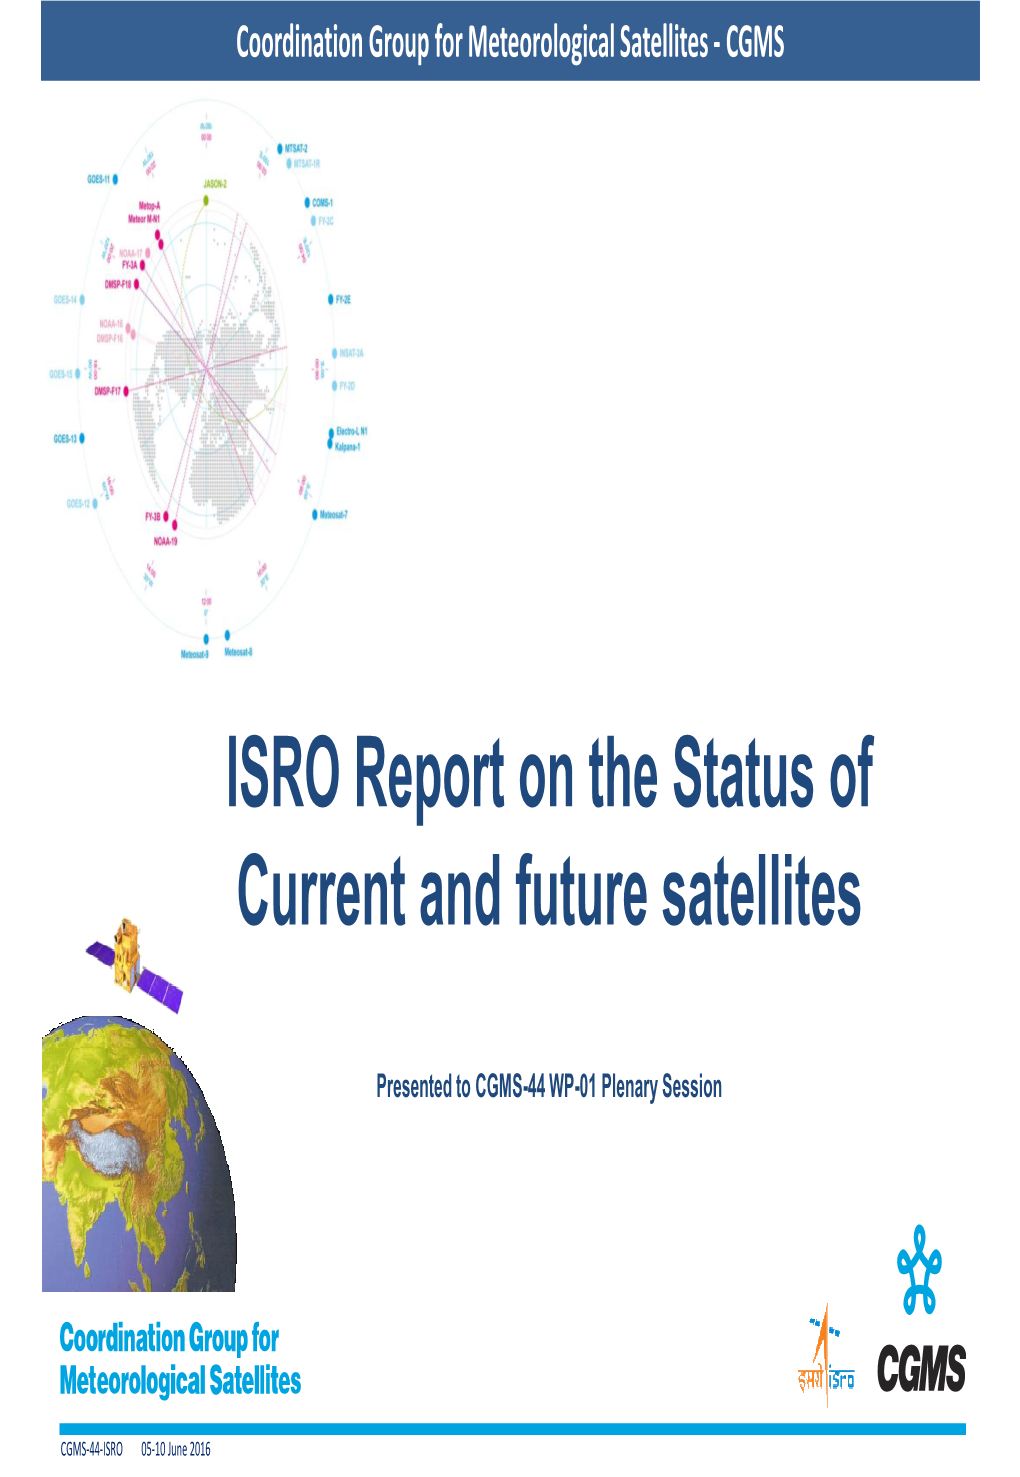 ISRO Report on the Status of Current and Future Satellites